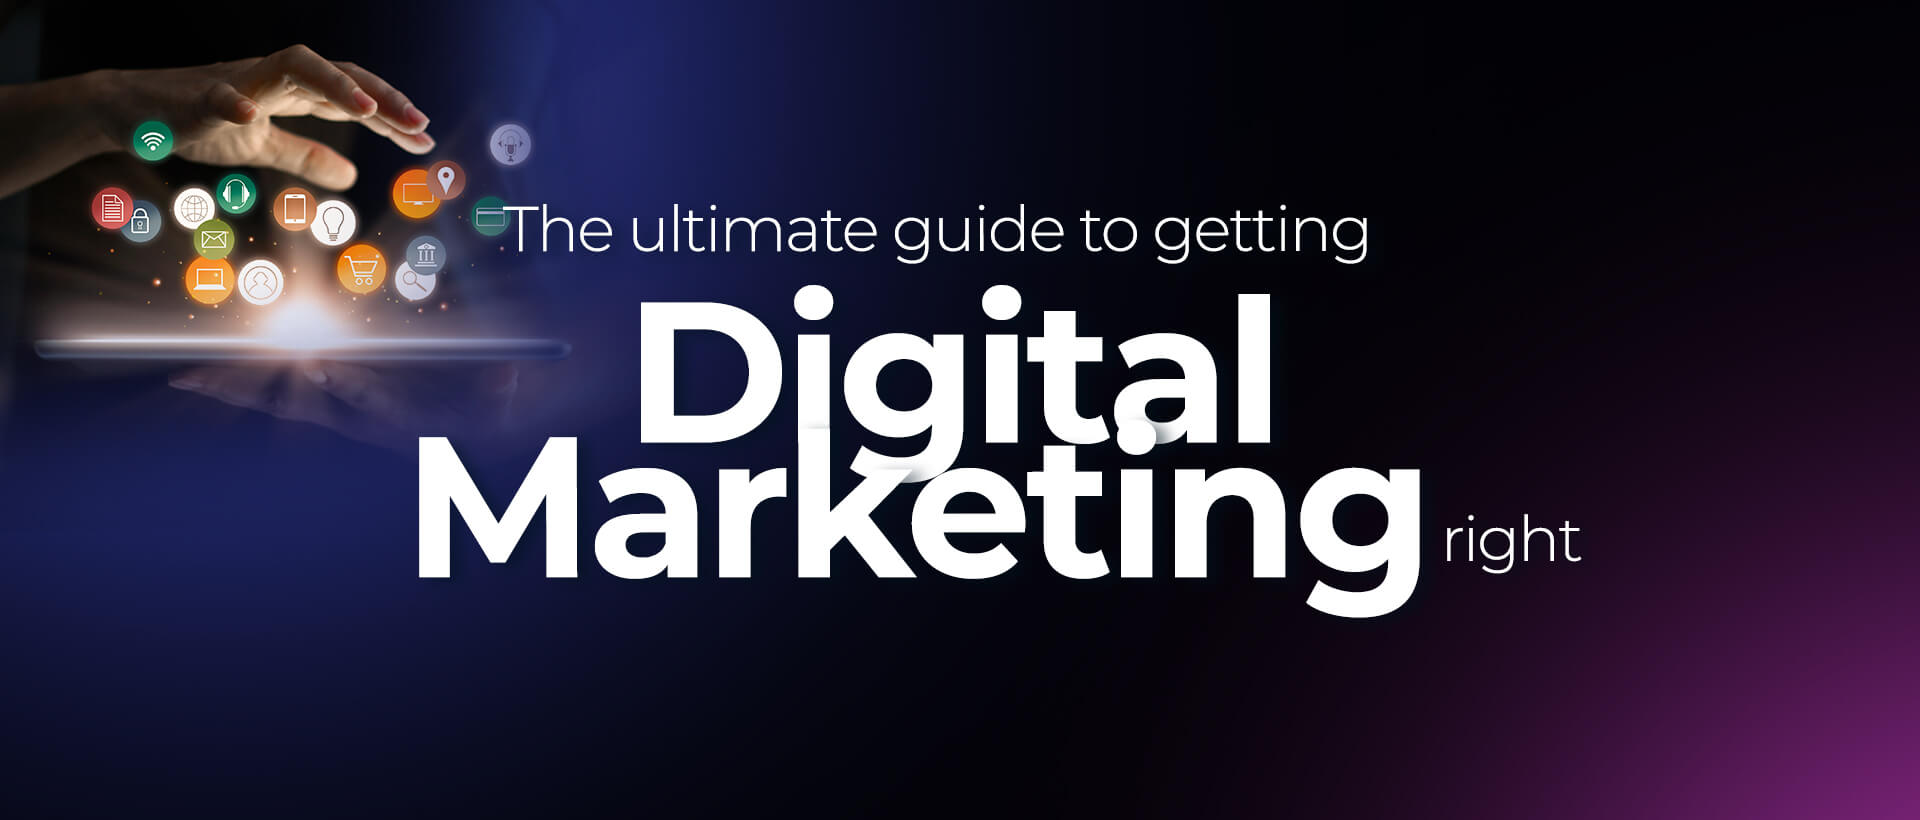 The ultimate guide to getting digital marketing right